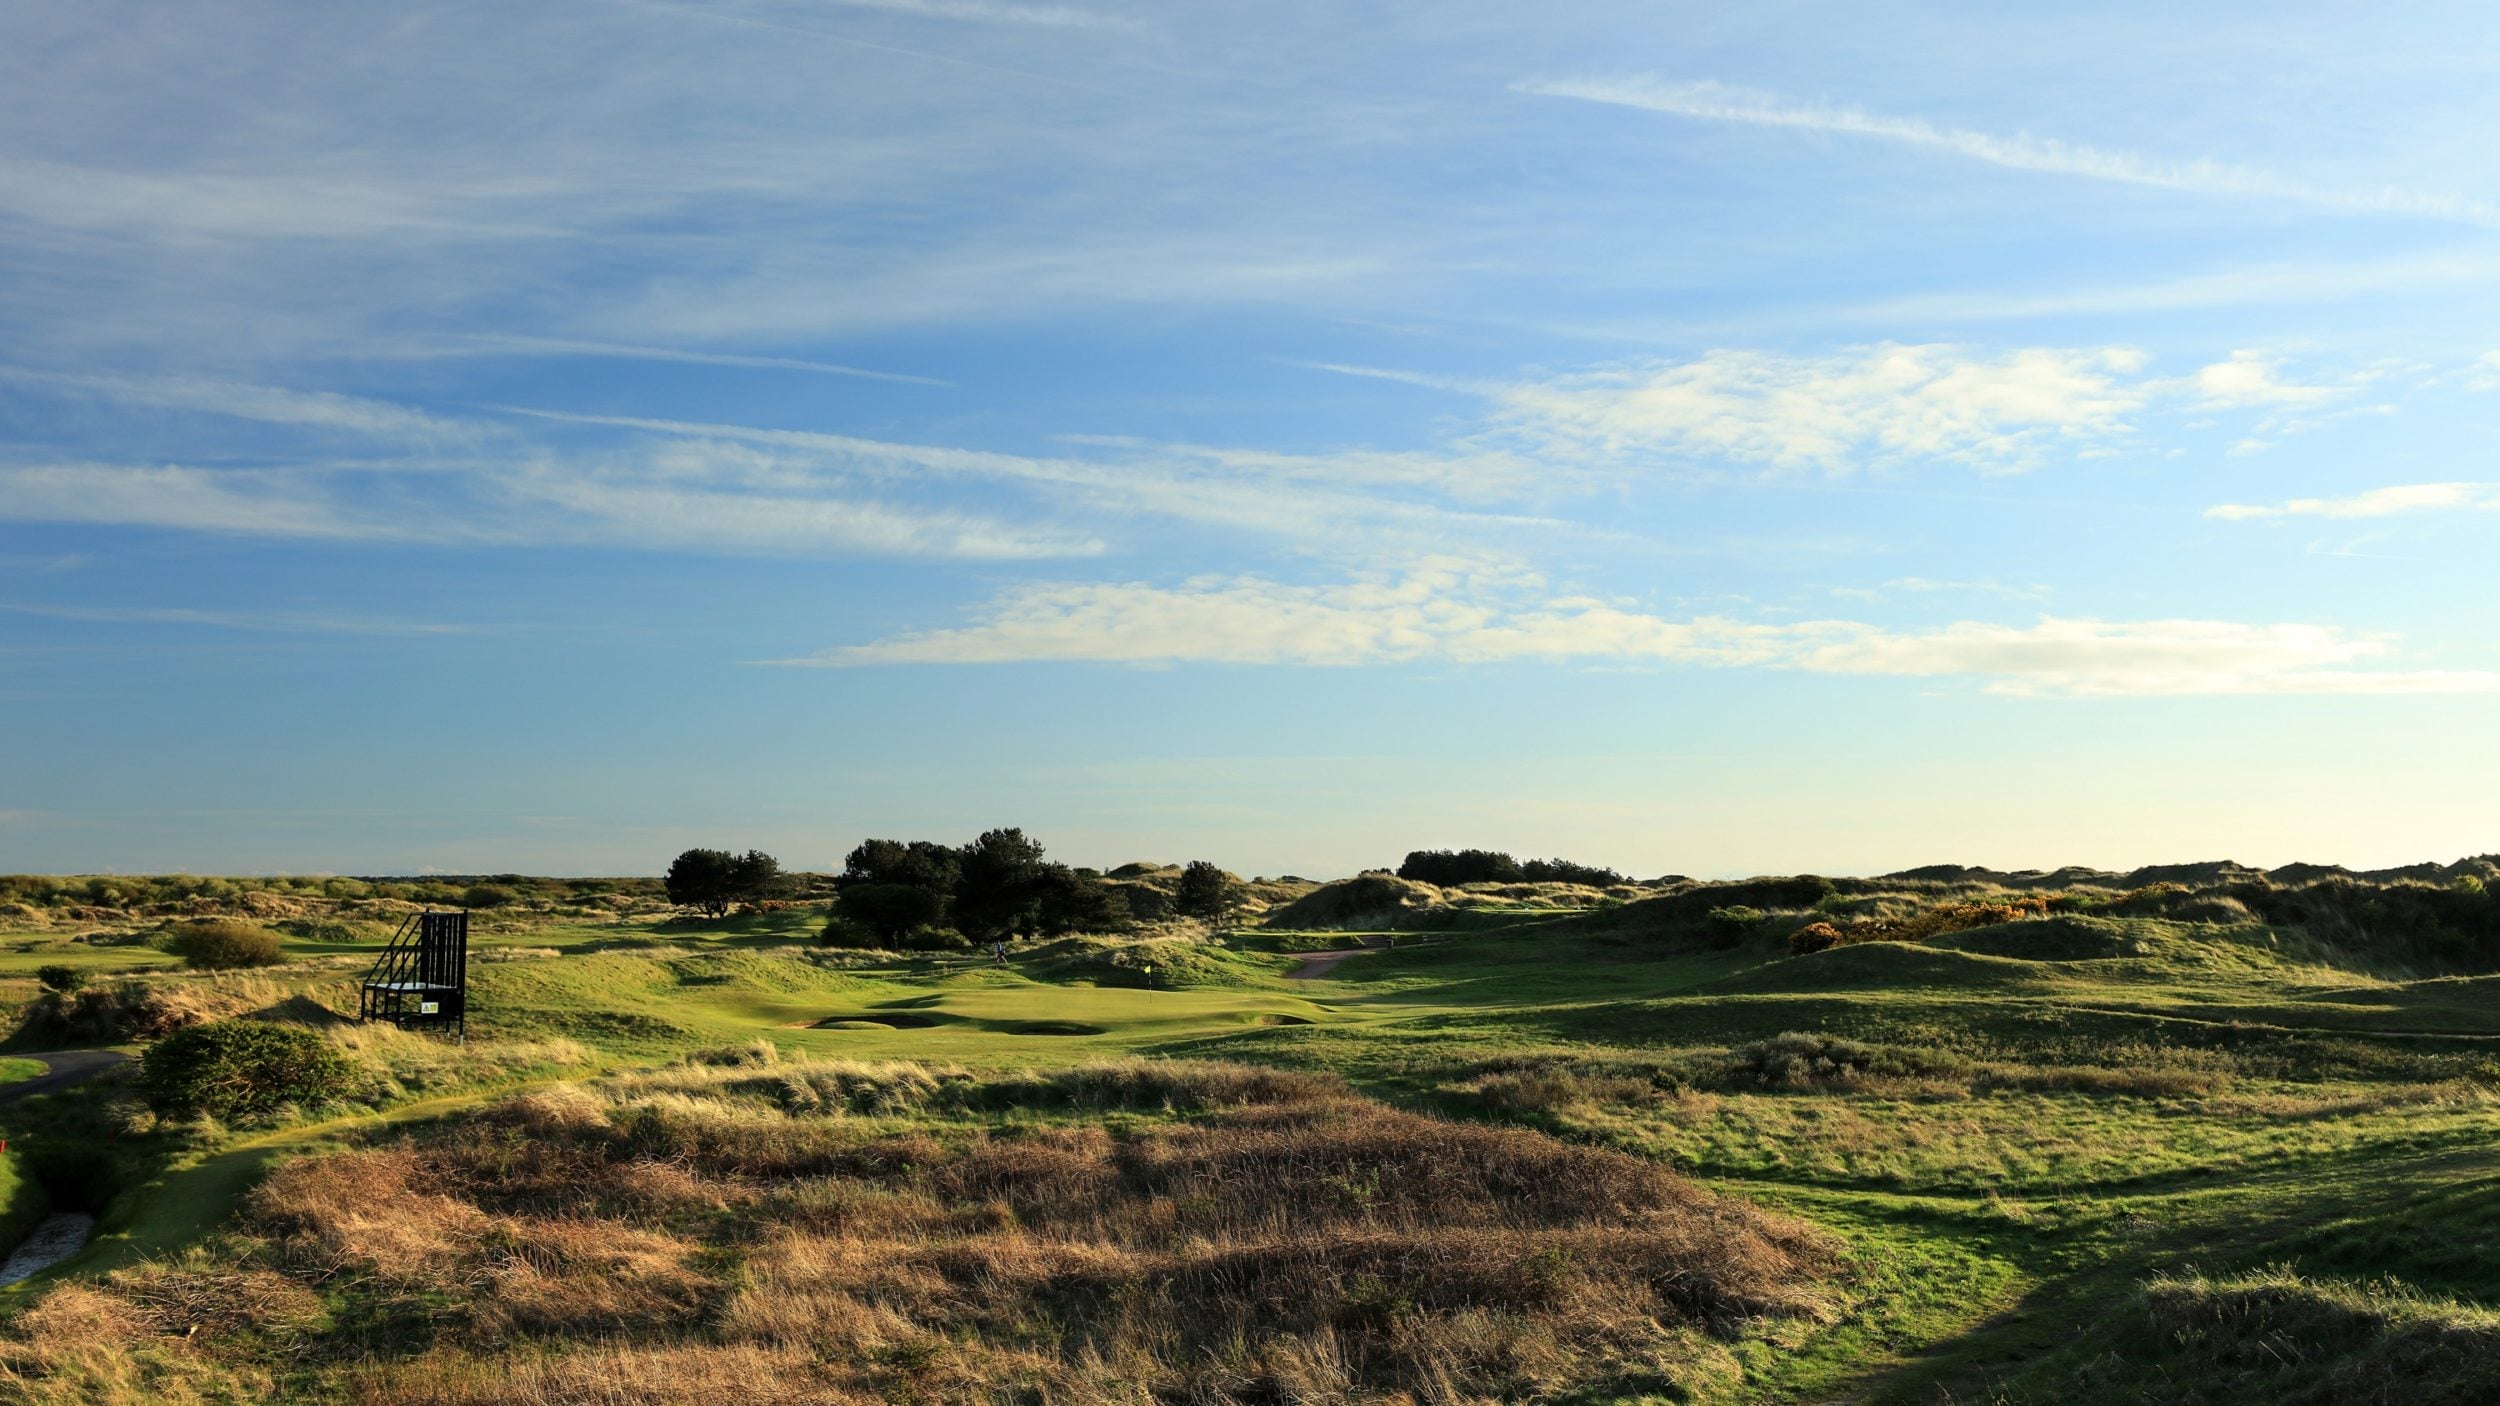 Landscape view of the seventh green with long fescue grass surrounding